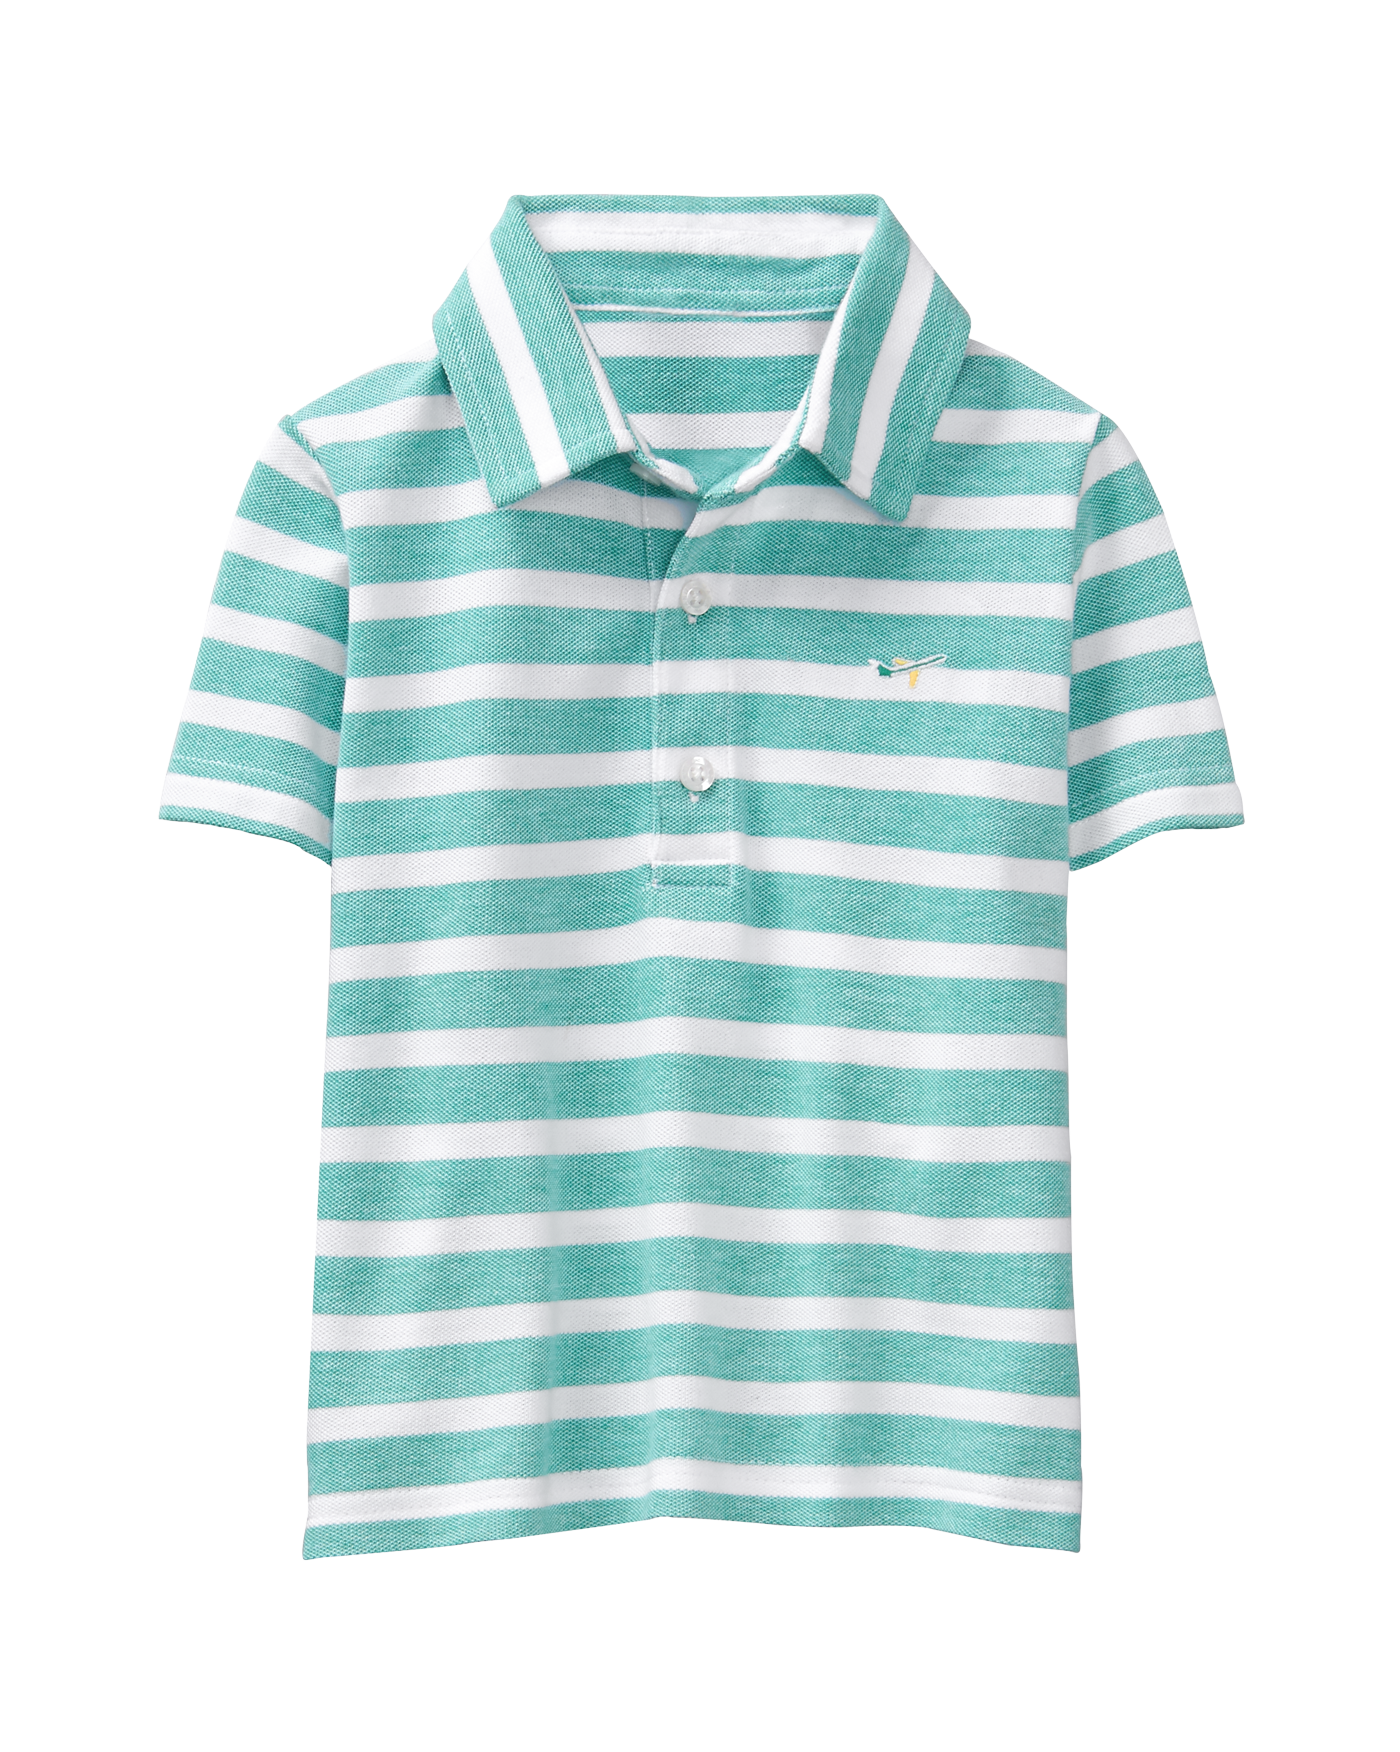 Embroidered Striped Polo